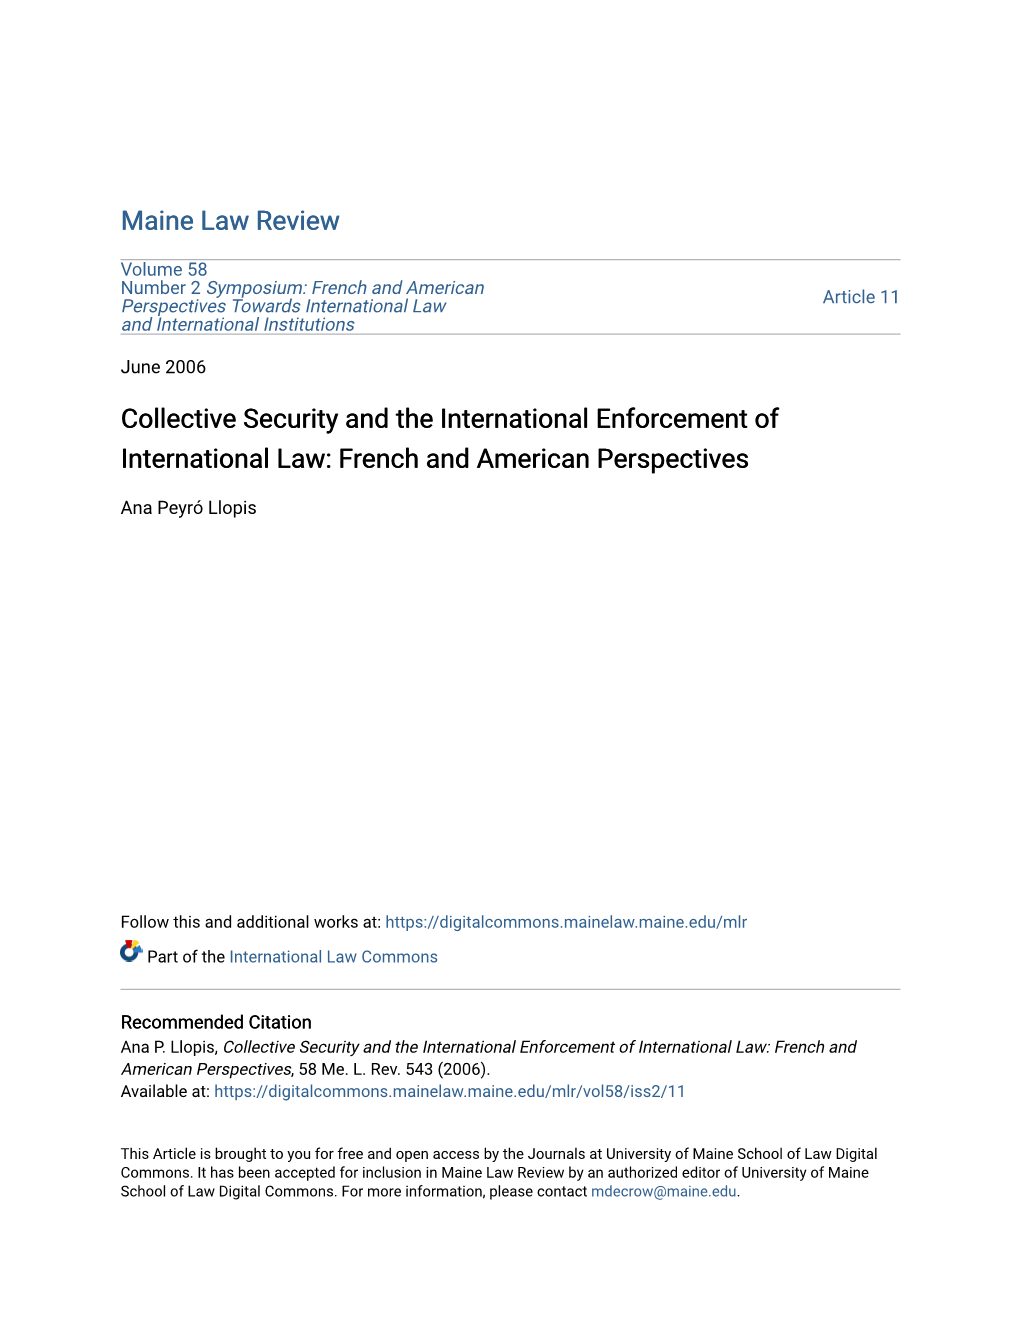 Collective Security and the International Enforcement of International Law: French and American Perspectives